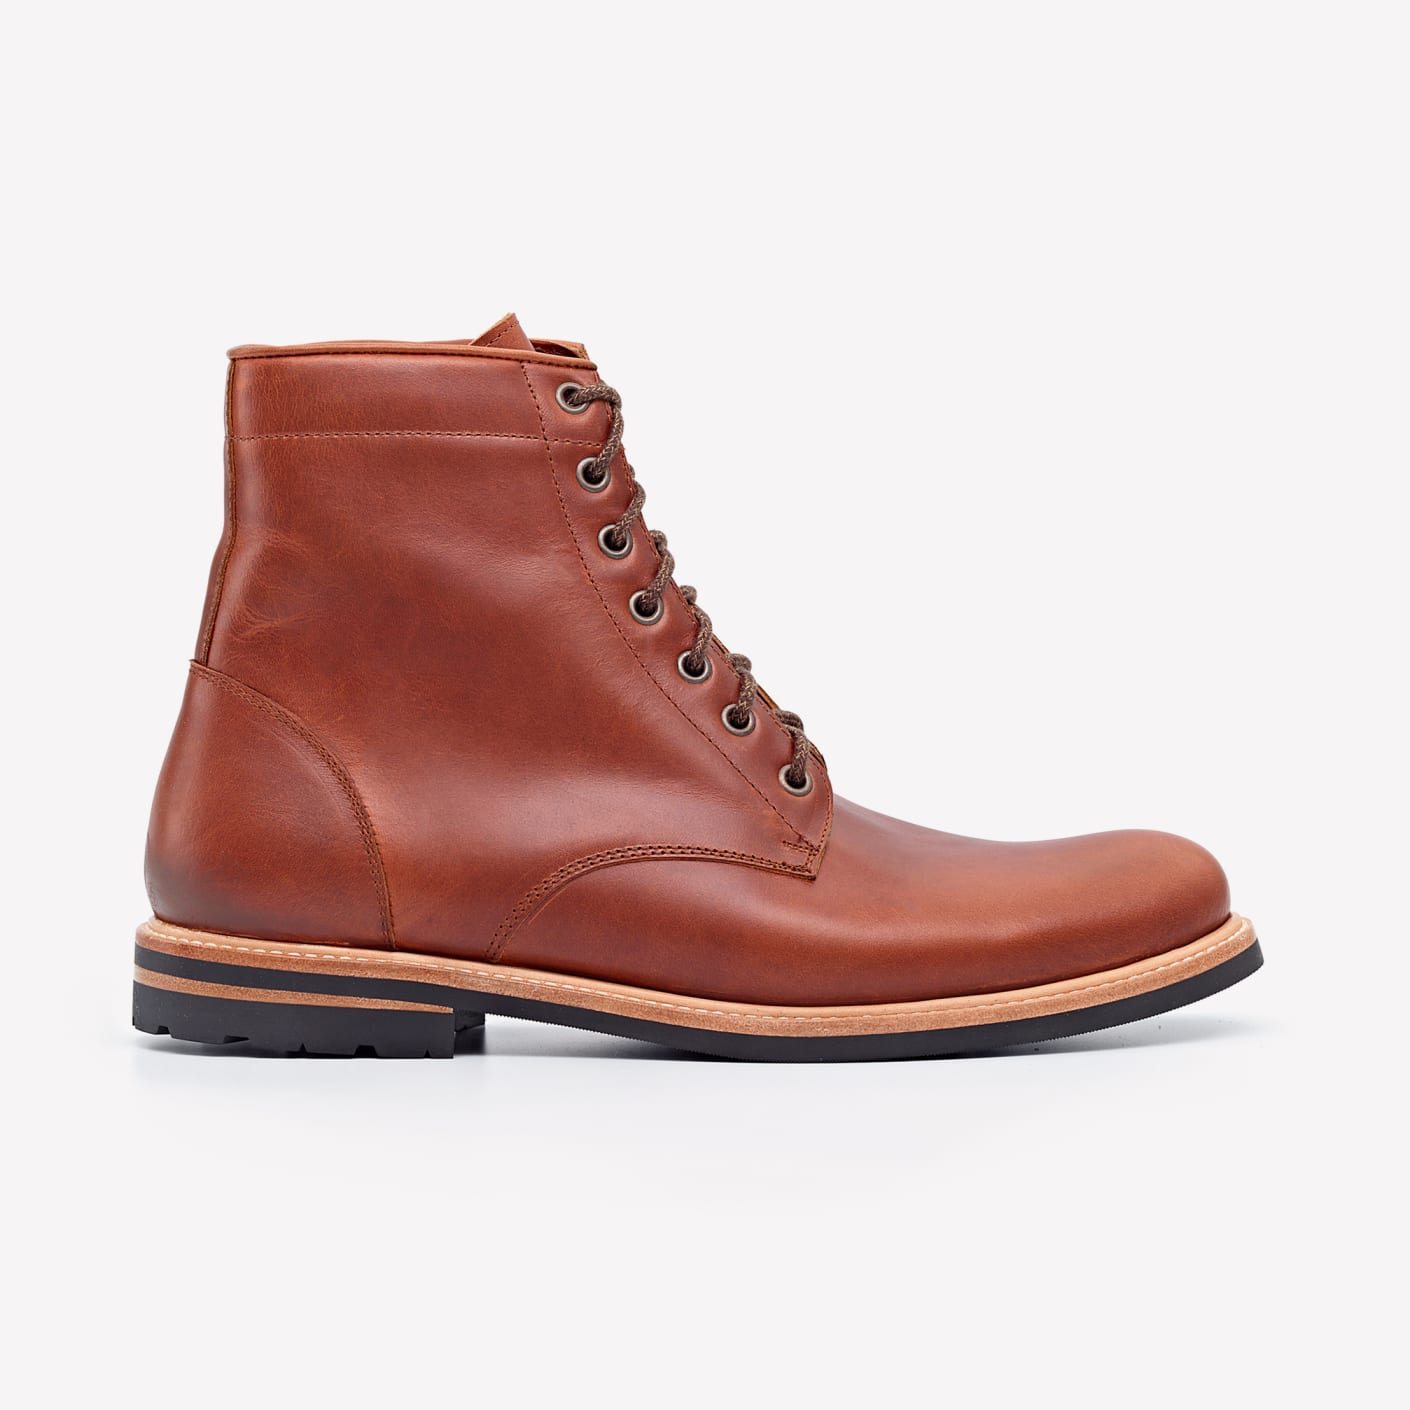 Nisolo, Andres All Weather Boot, Brandy